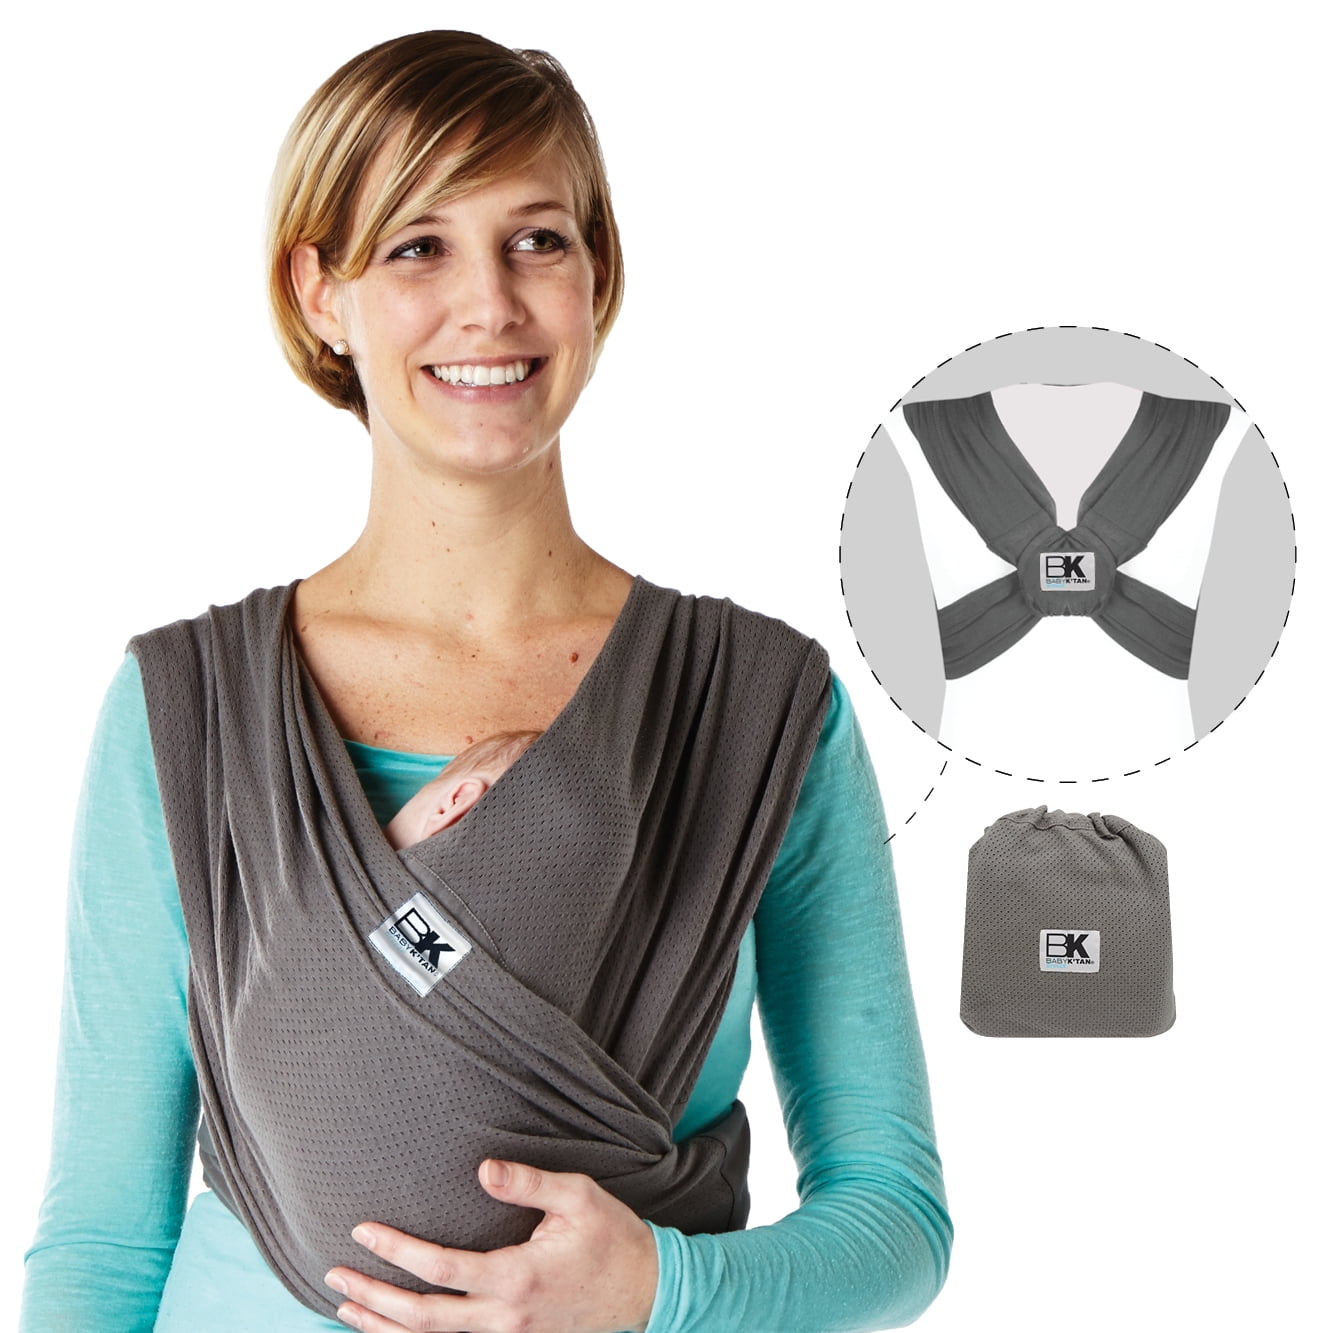 W Dress 2-4 / M Jacket up to 36 Infant and Child Sling-Black XS Newborn up to 35 lbs Best for Babywearing. Baby Ktan Breeze Baby Wrap Carrier 